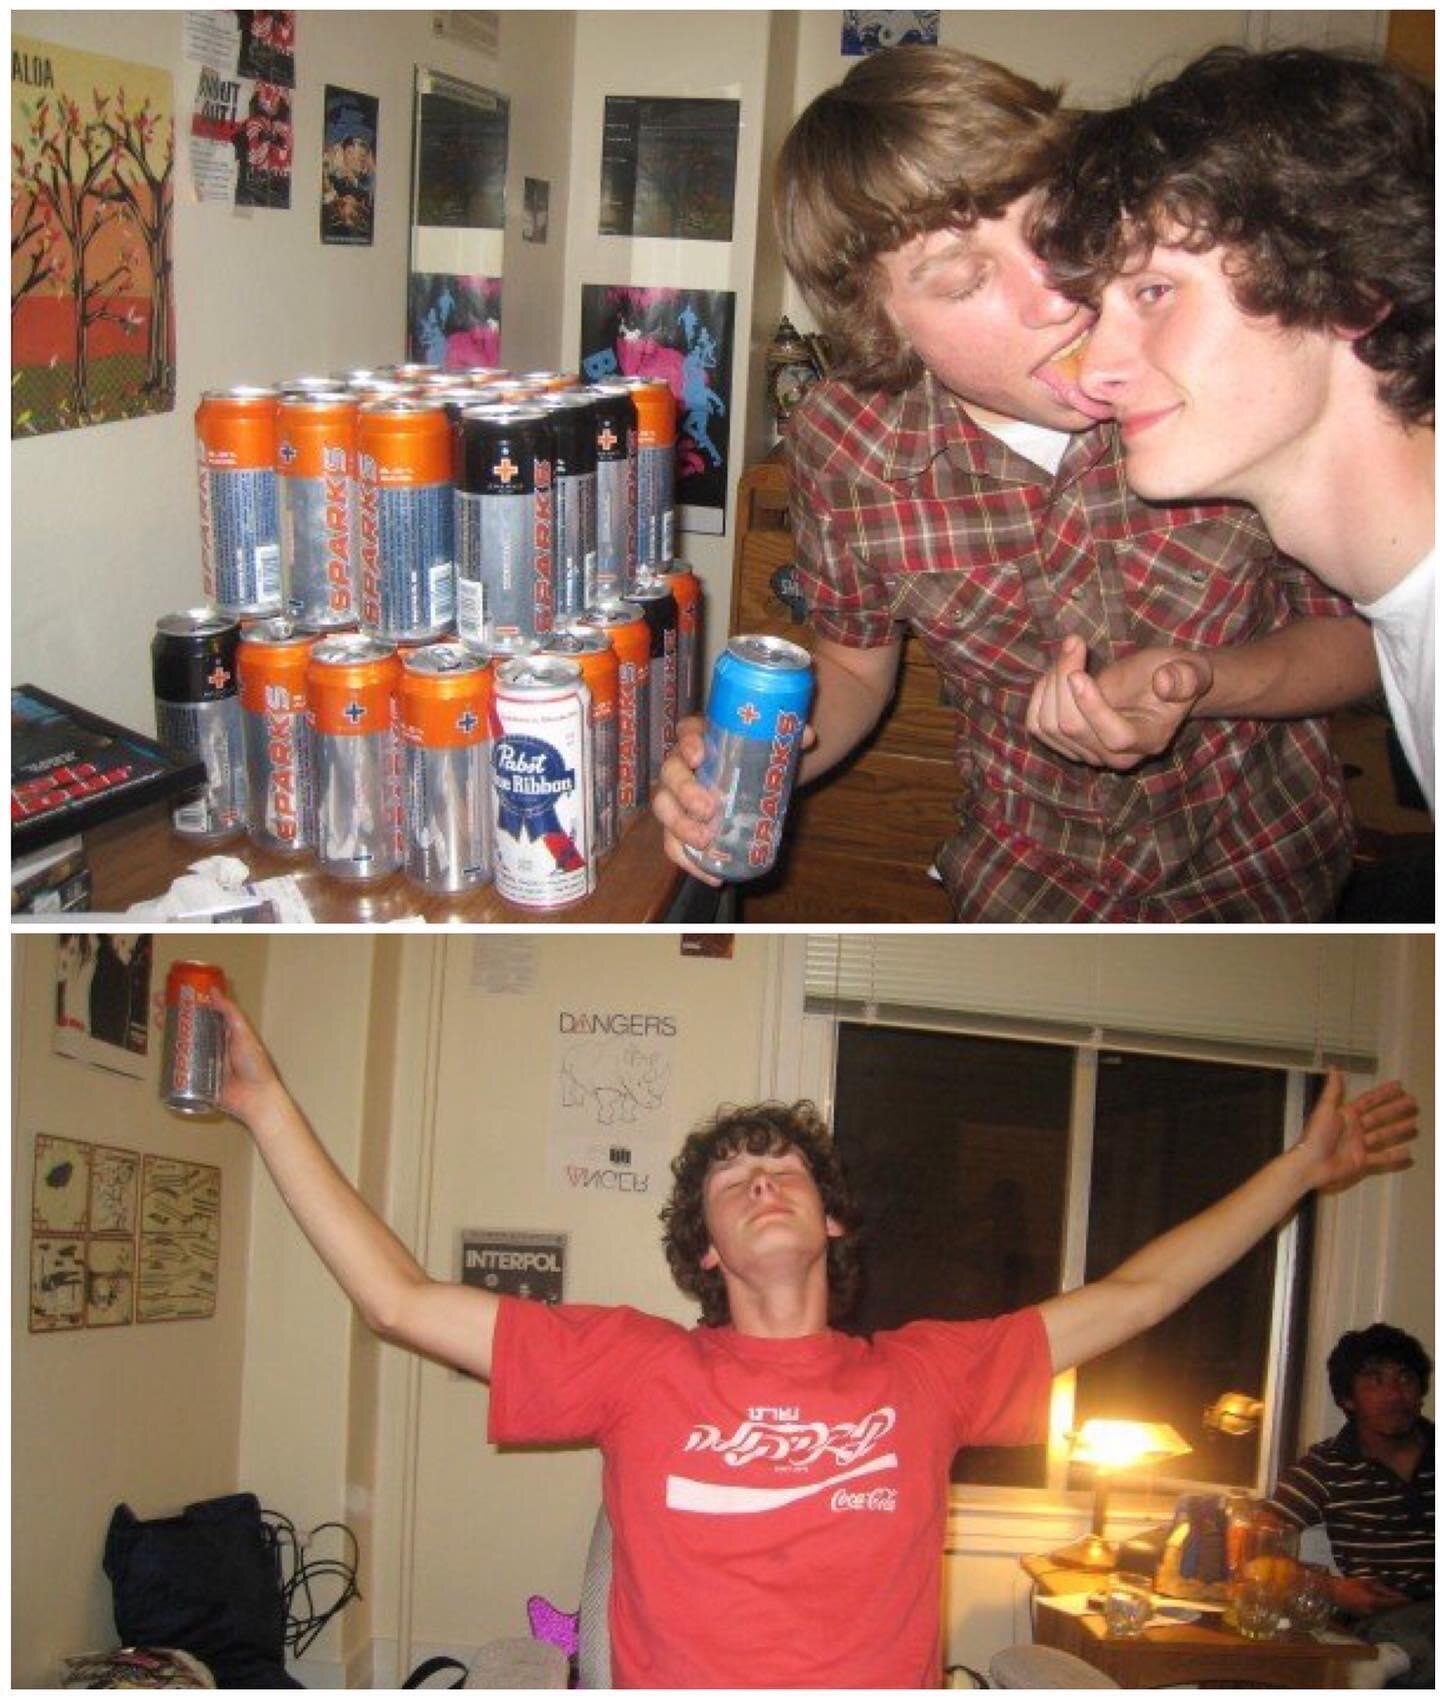 Greg Nance: Some incriminating photos from his younger days of partying.